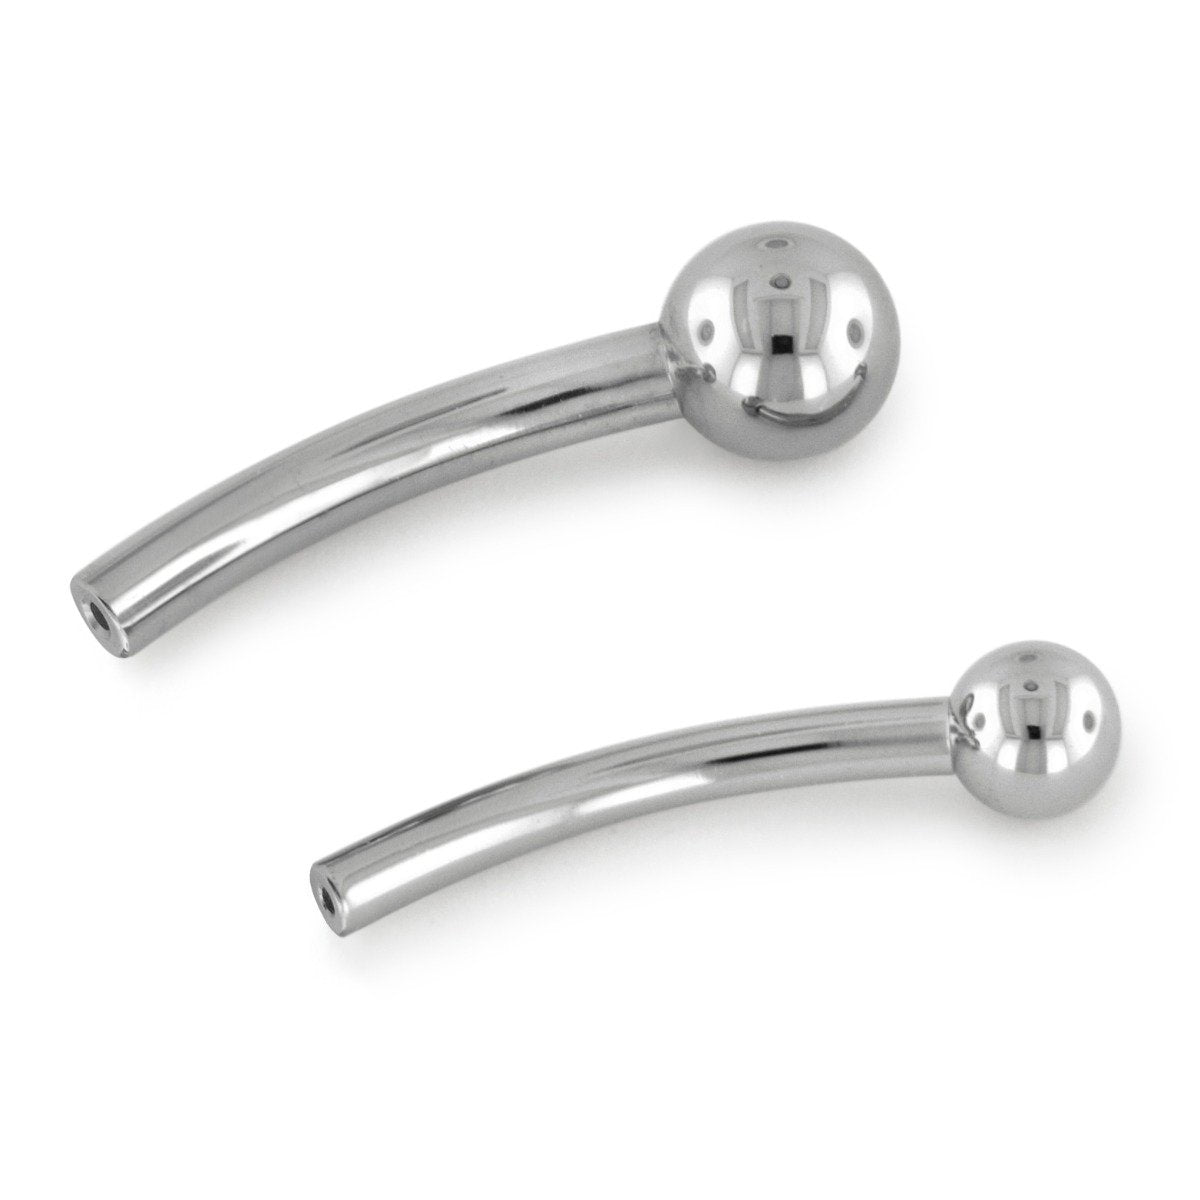 Two threadless titanium curved barbells with one end capped with a titanium ball end and the other open.